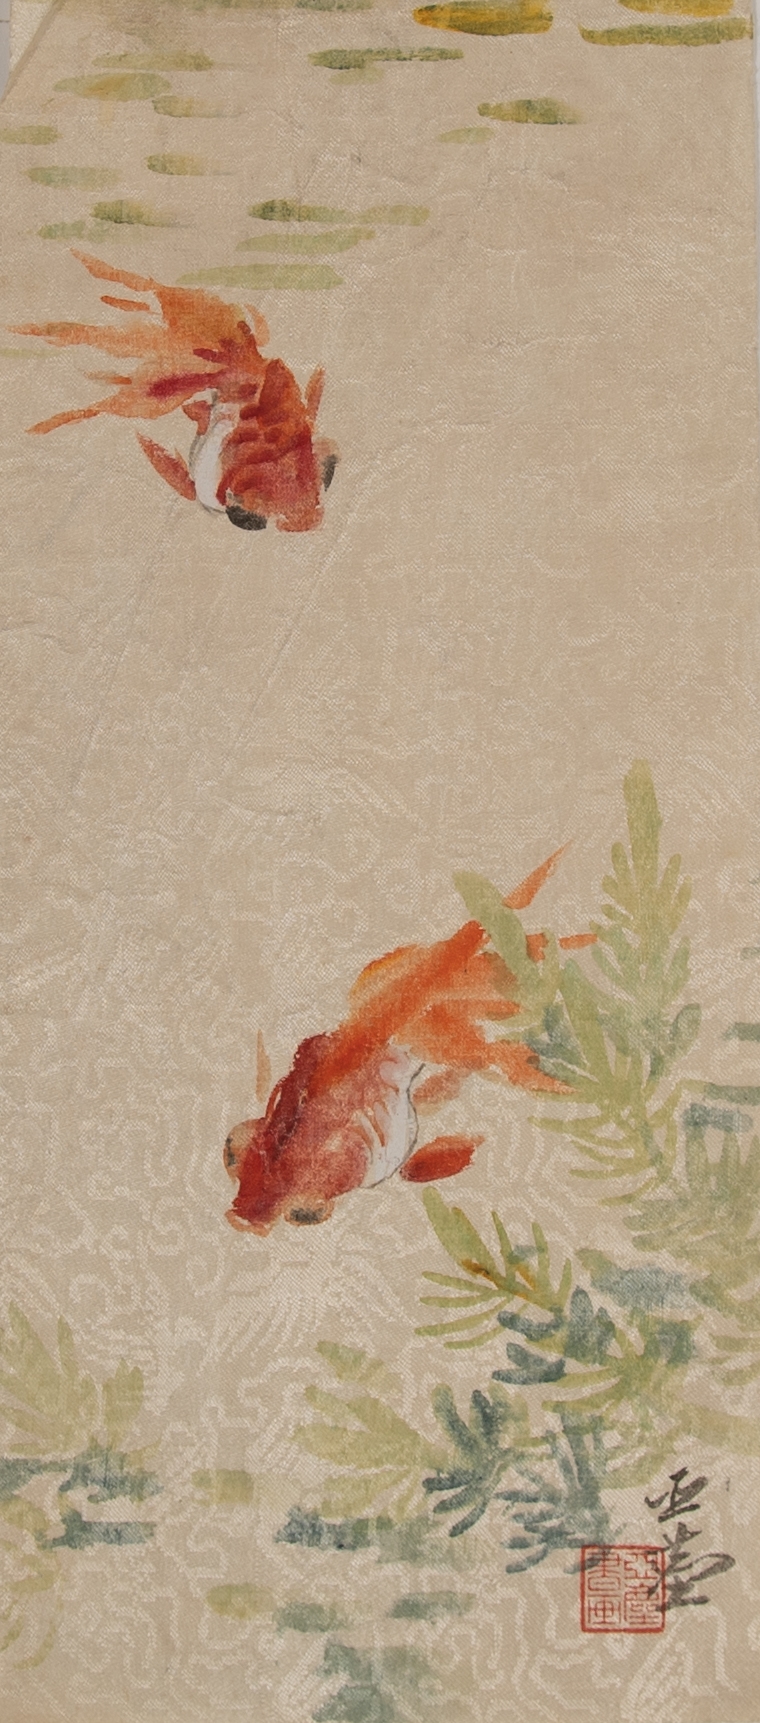 Artwork by Wang Yachen, Chinese Painting of Goldfish, Made of watercolor and ink painting on silk